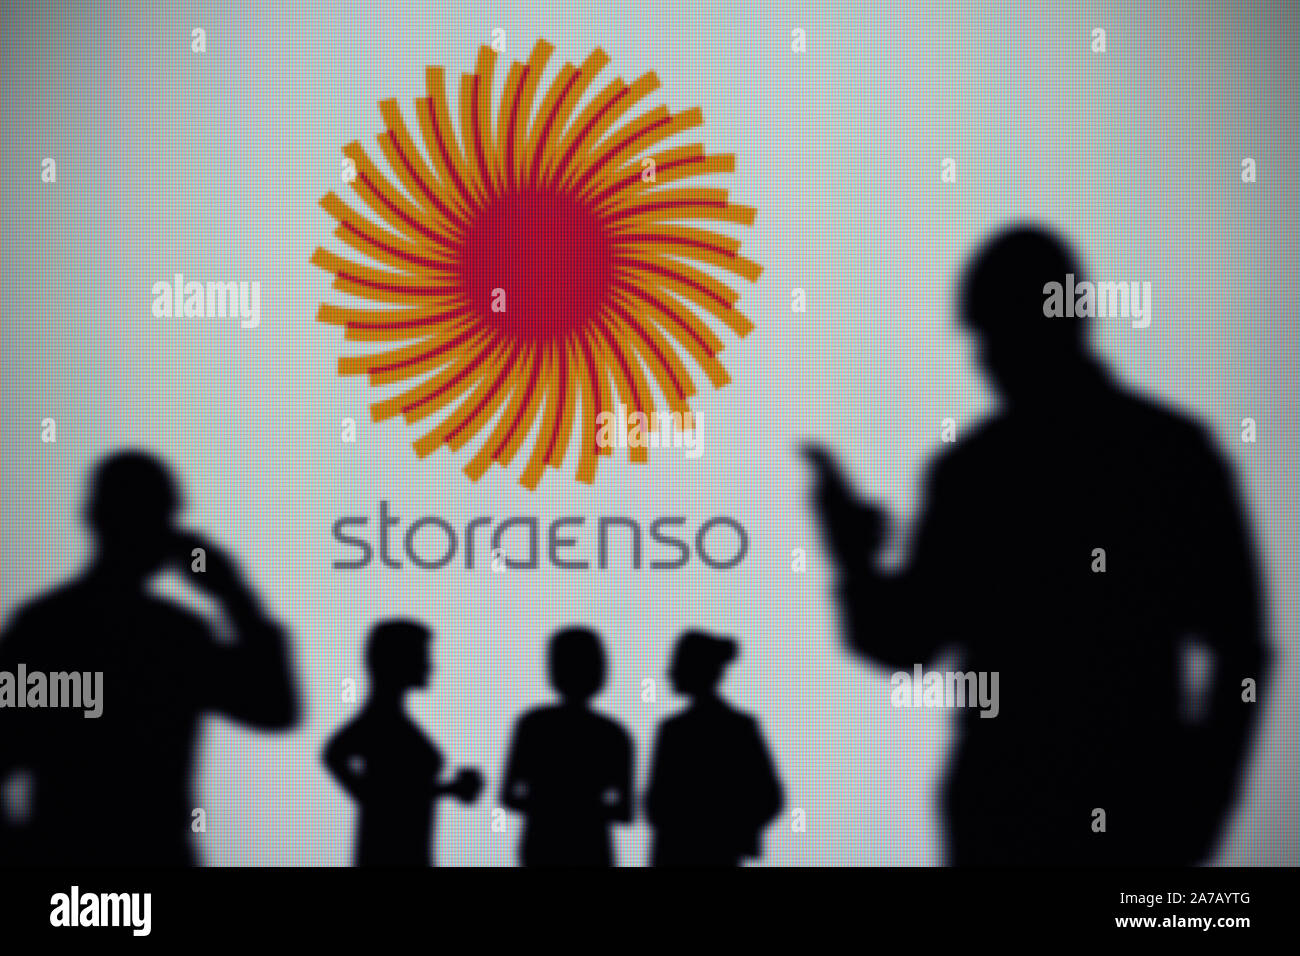 The Stora Enso logo is seen on an LED screen in the background while a silhouetted person uses a smartphone (Editorial use only) Stock Photo